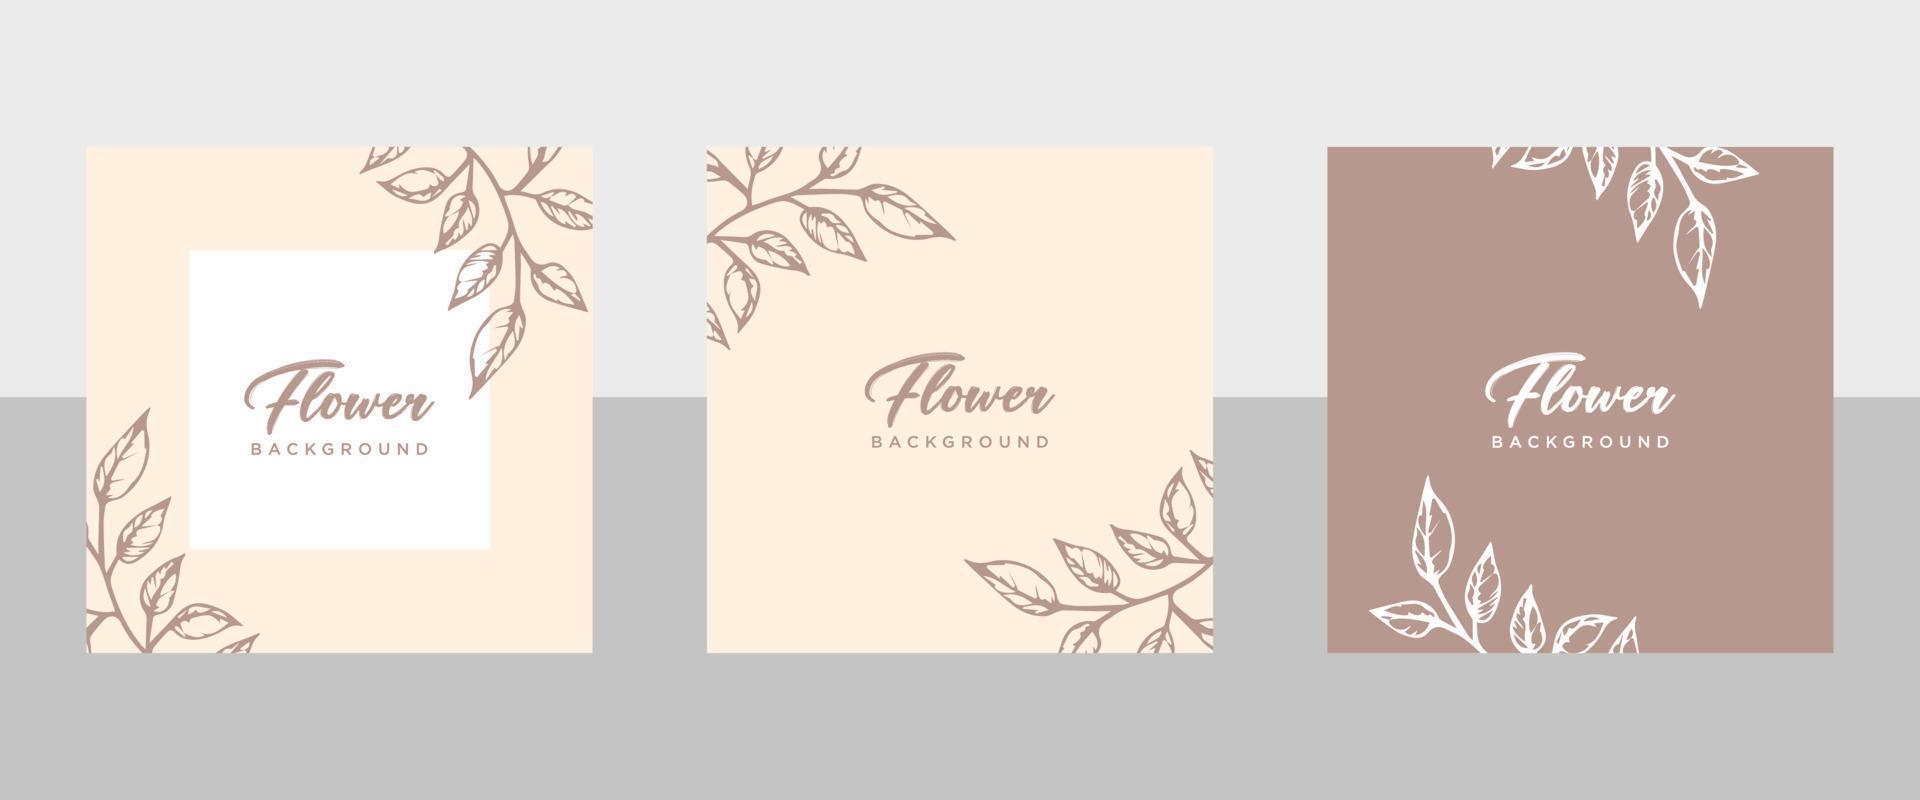 Neutral floral background  in simple colors. Vector border with hand drawn flowers in line style for social media post, invitation, greeting card, branding design, banner, poster, advertising